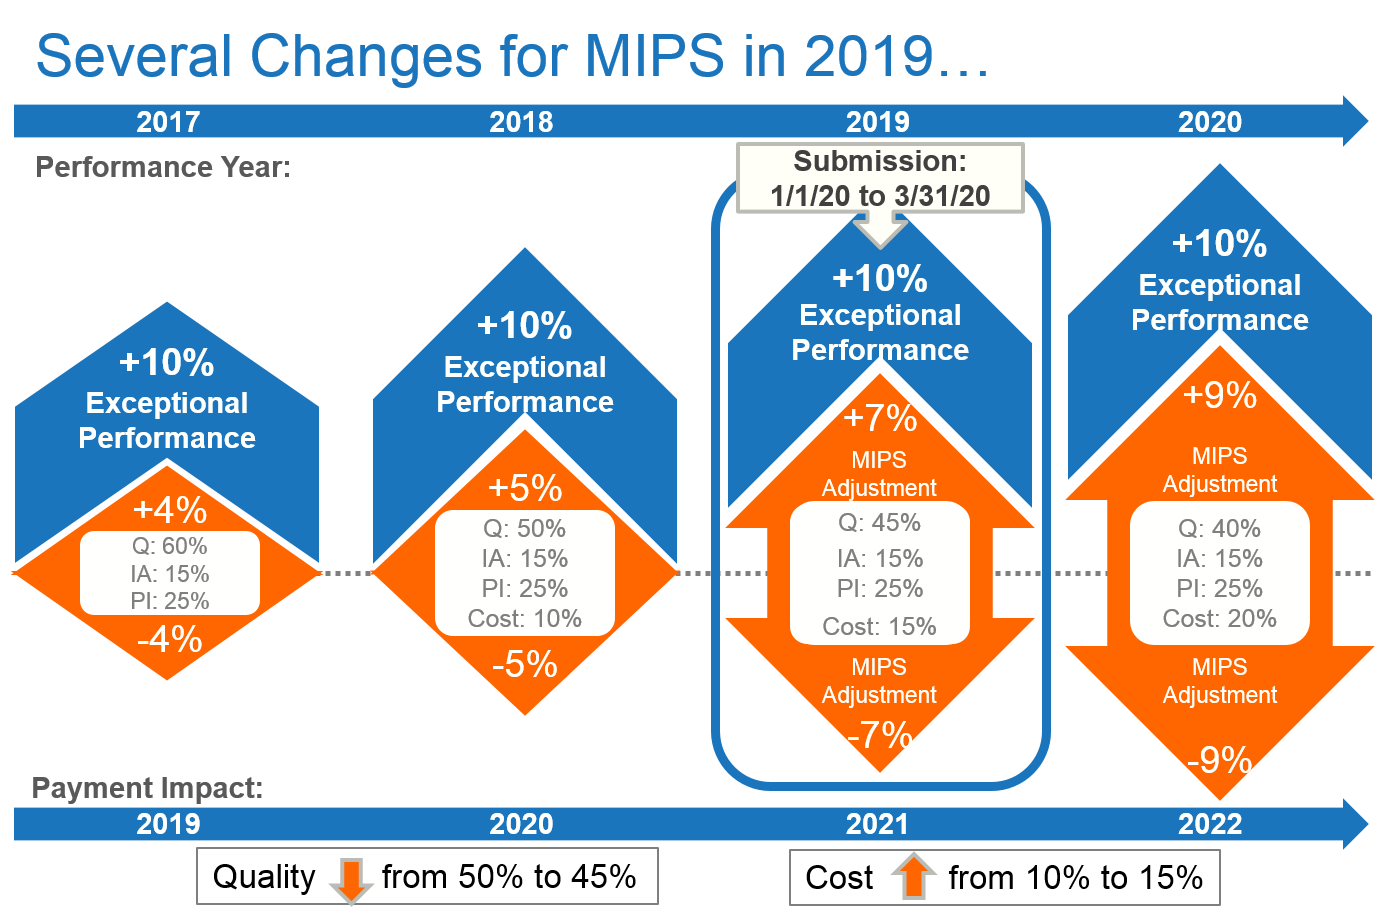 Several Changes for MIPS in 2019 table